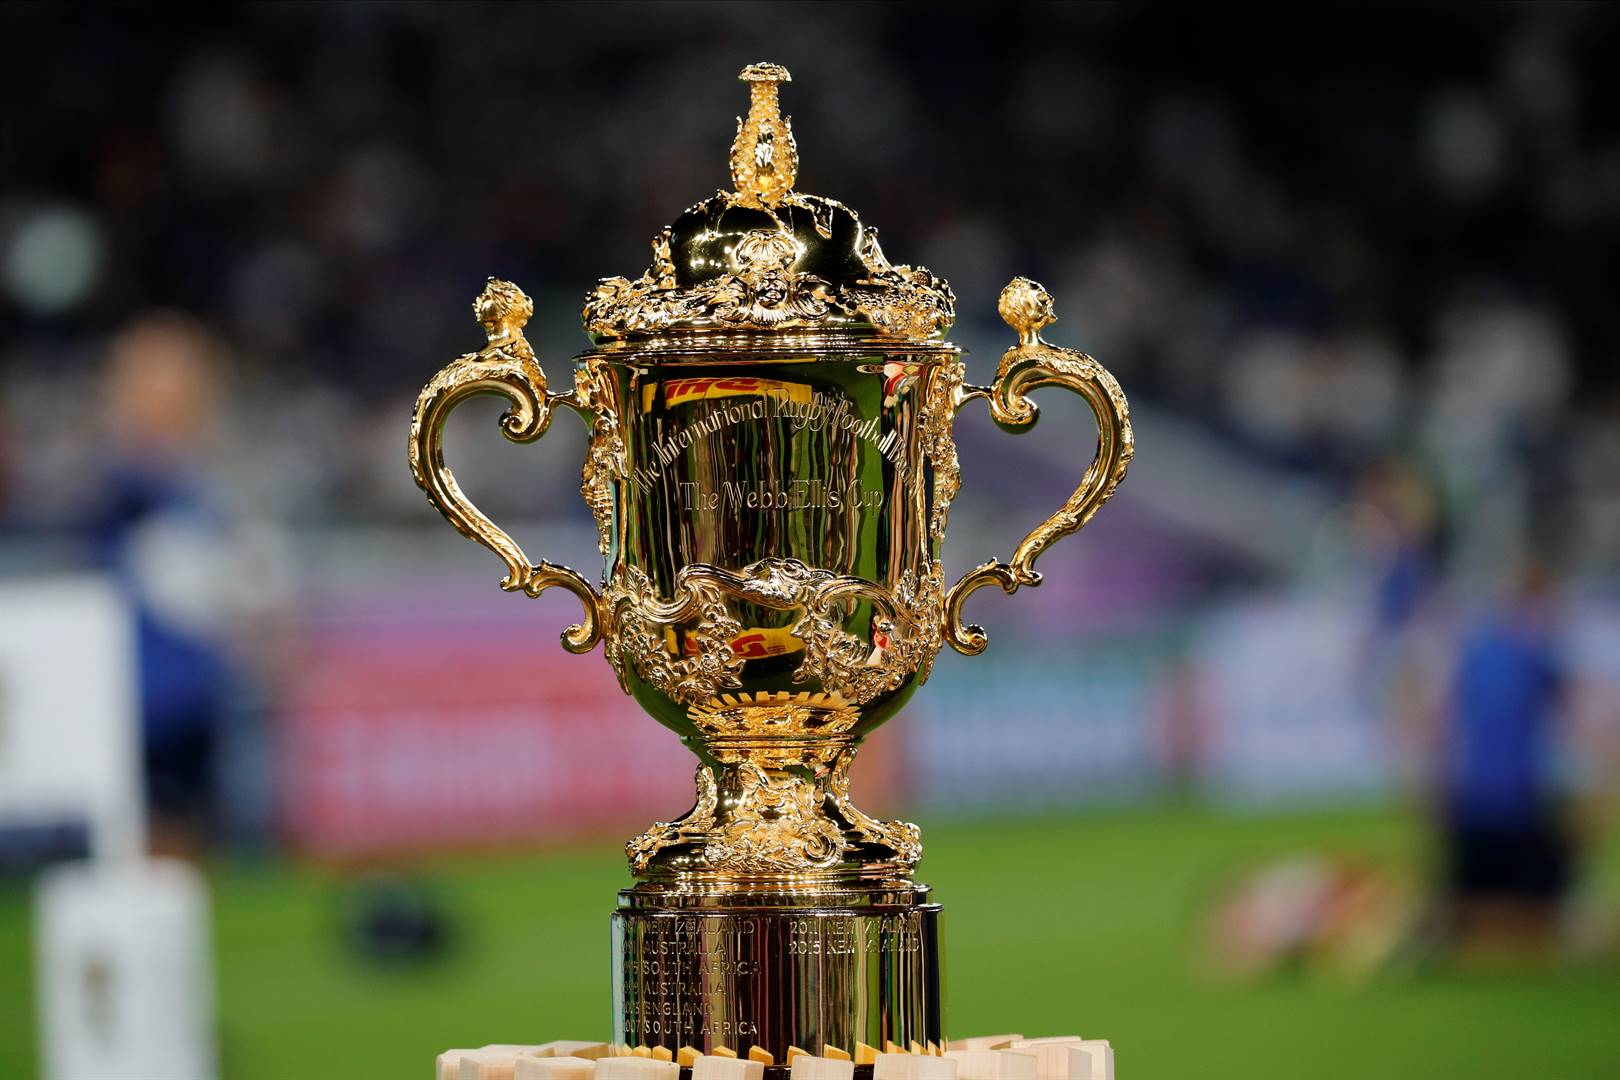 The Webb Ellis Cup, the championship trophy for the Rugby World Cup. Picture: Christophe Ena/AP